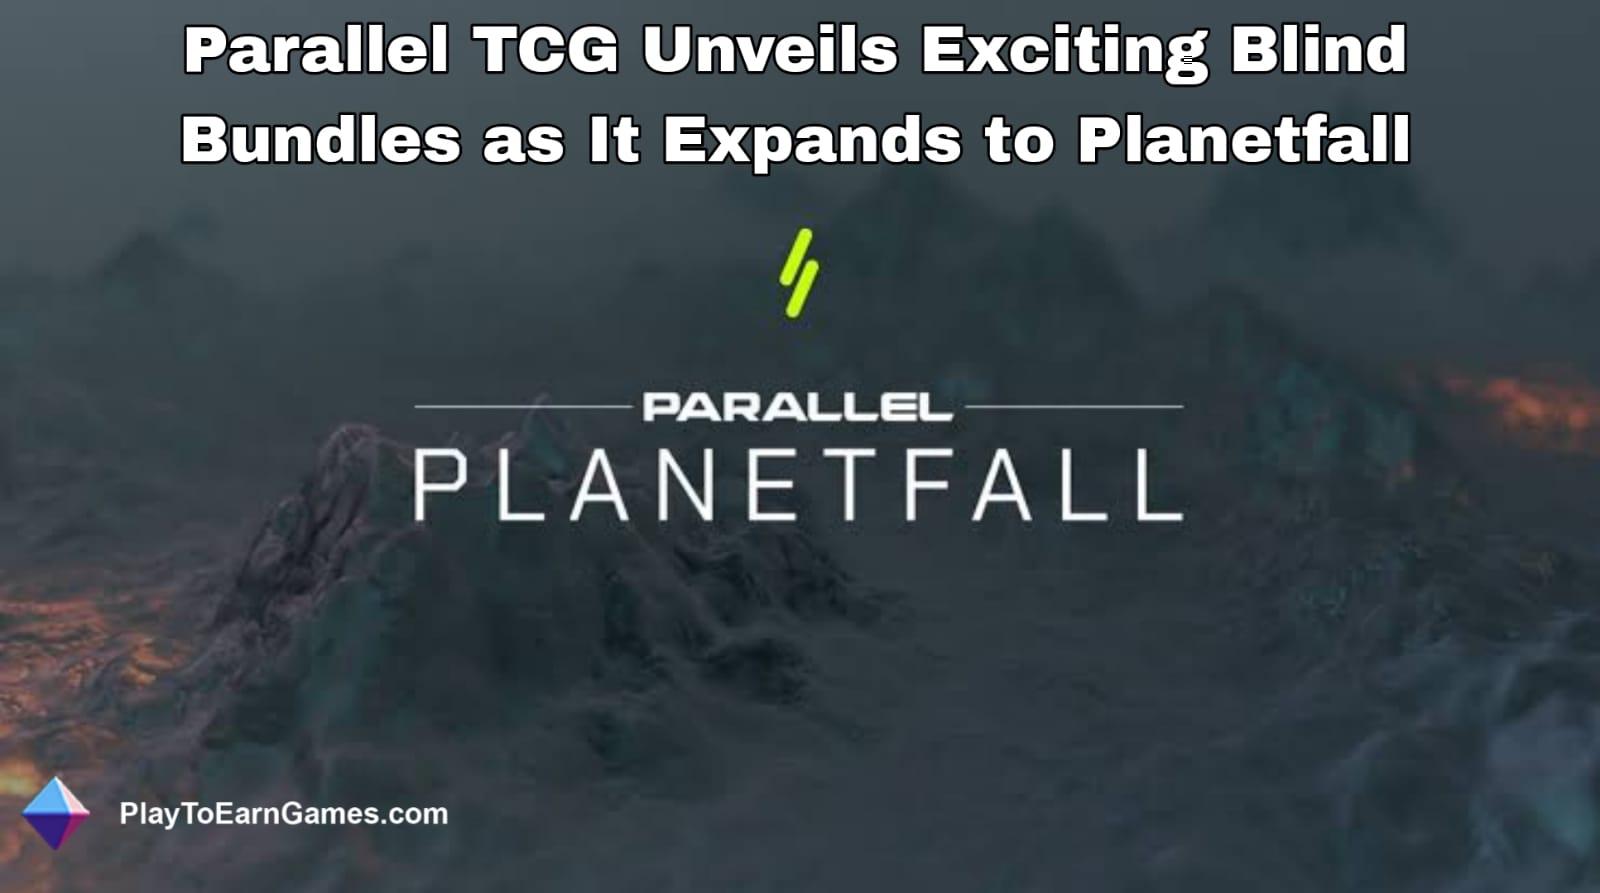 Parallel TCG Unveils Exciting Blind Bundles as It Expands to Planetfall